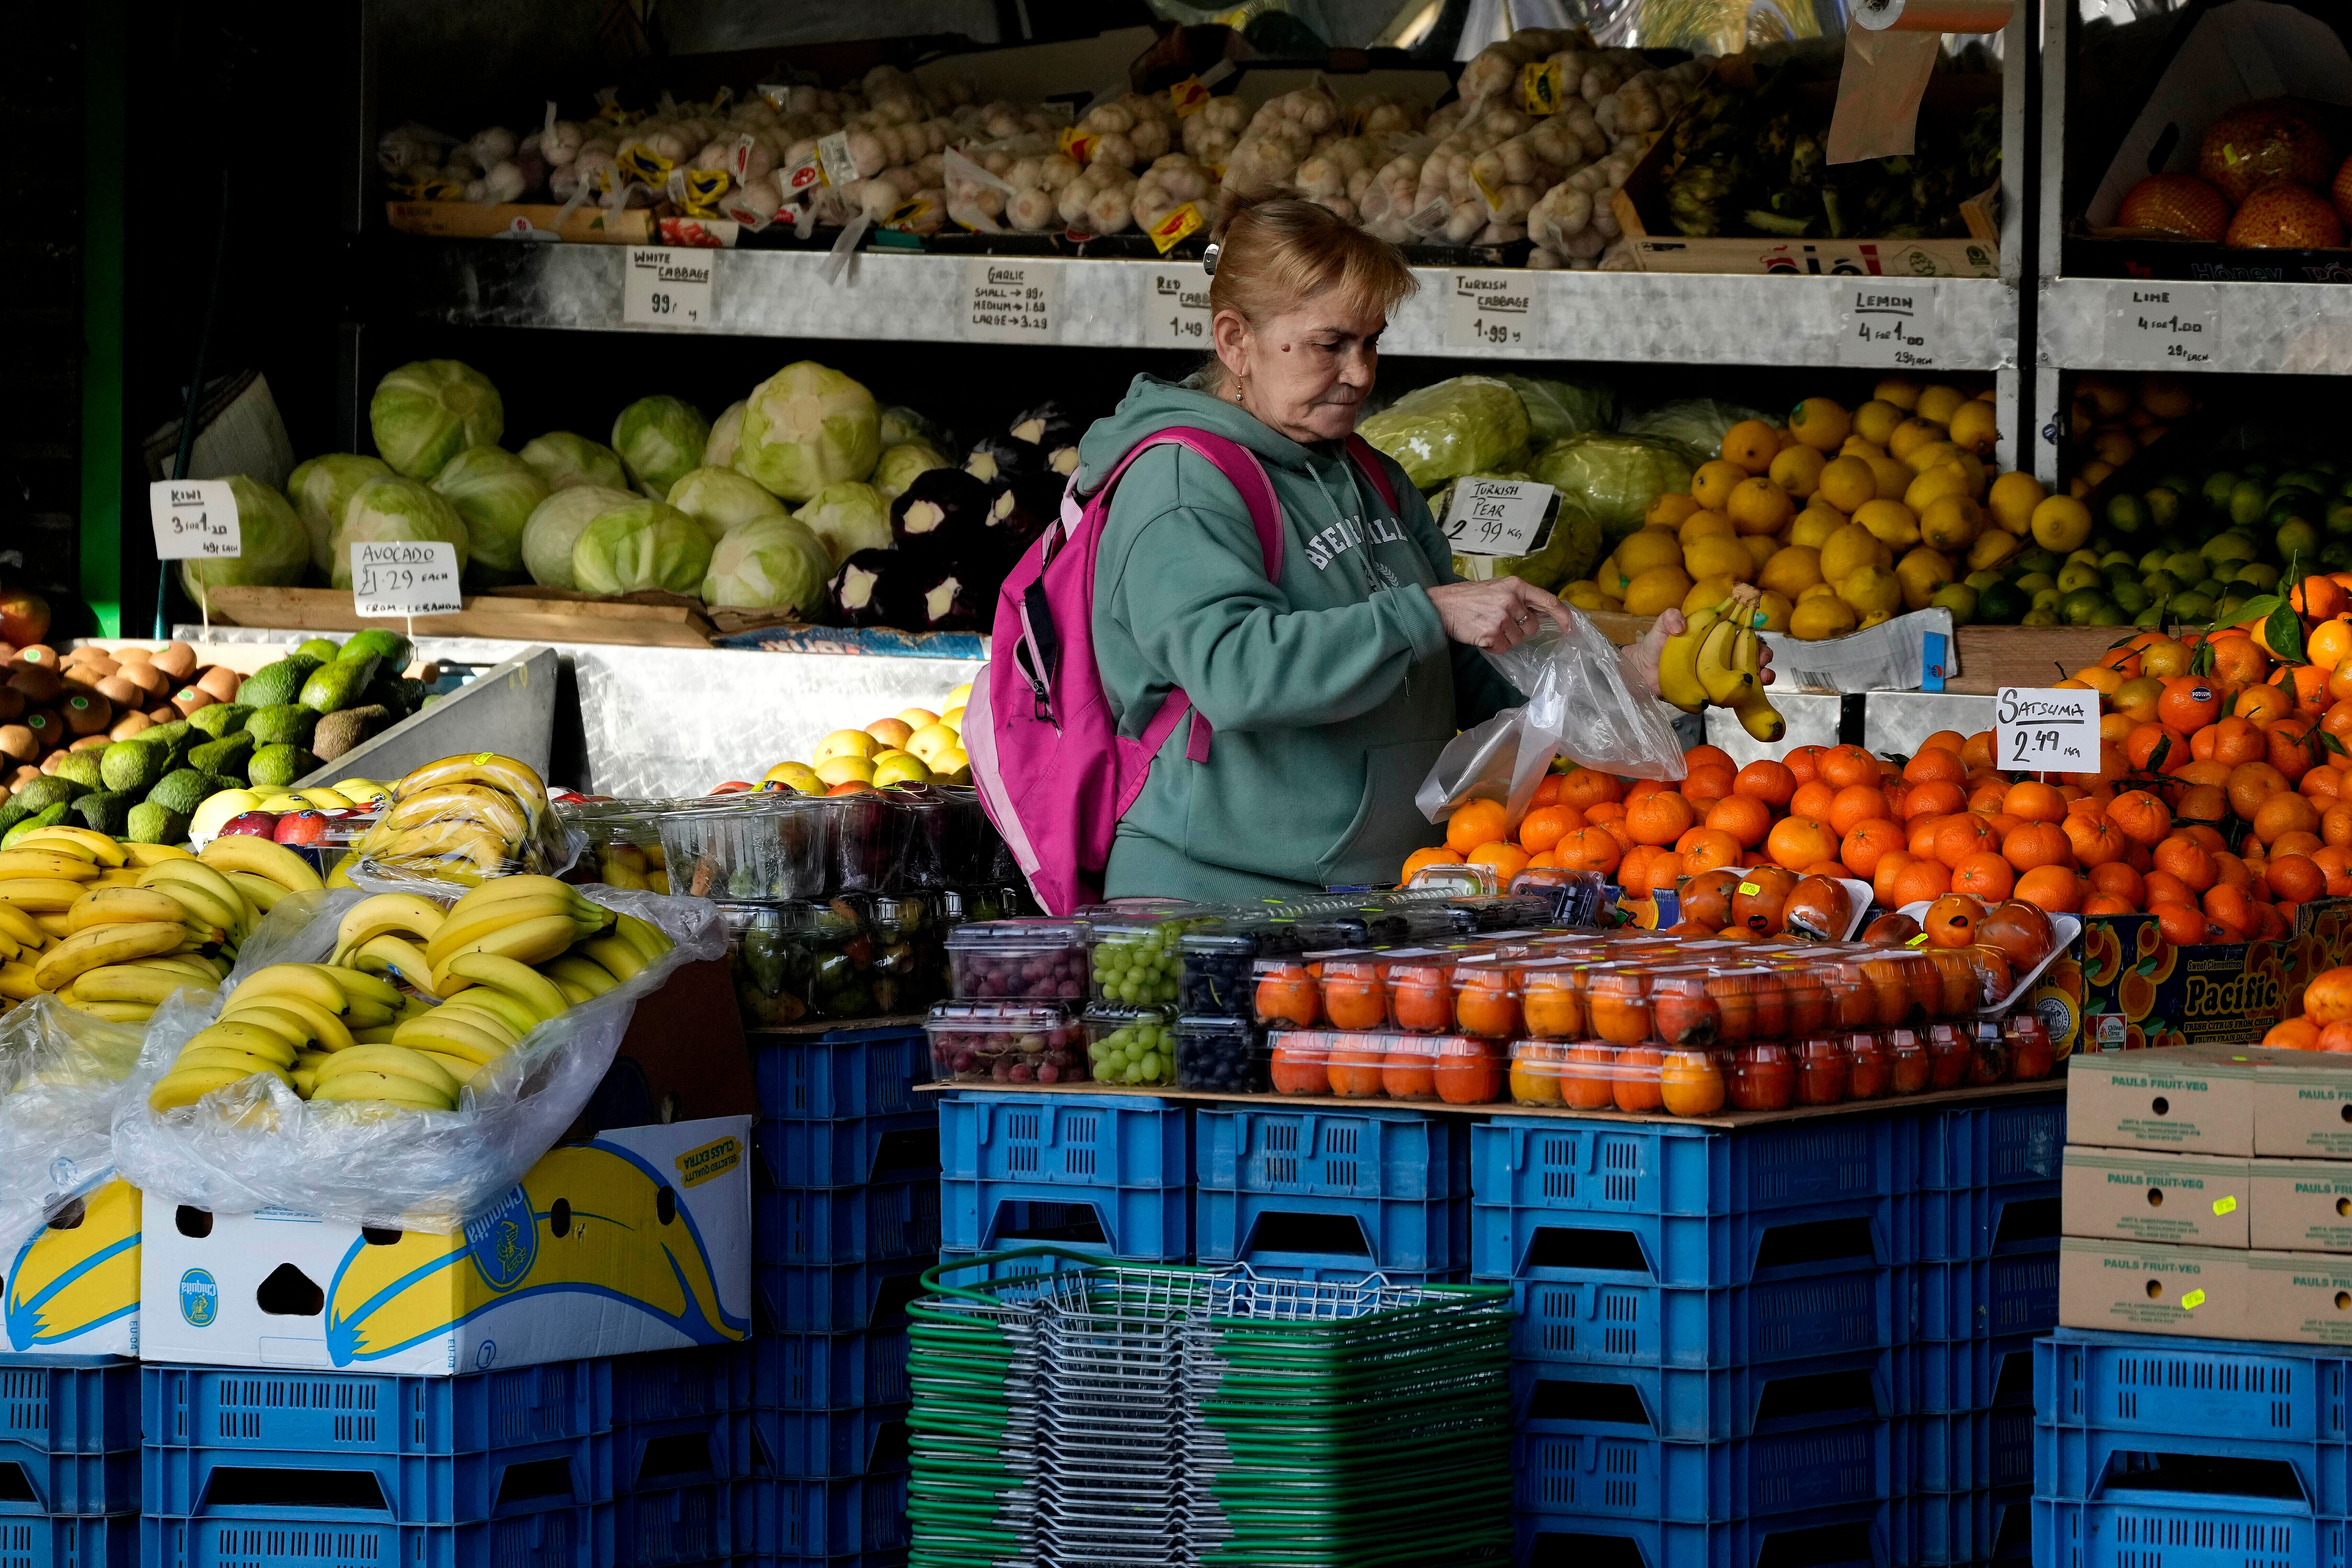 Inflation surged higher than expected on the back of rising food prices